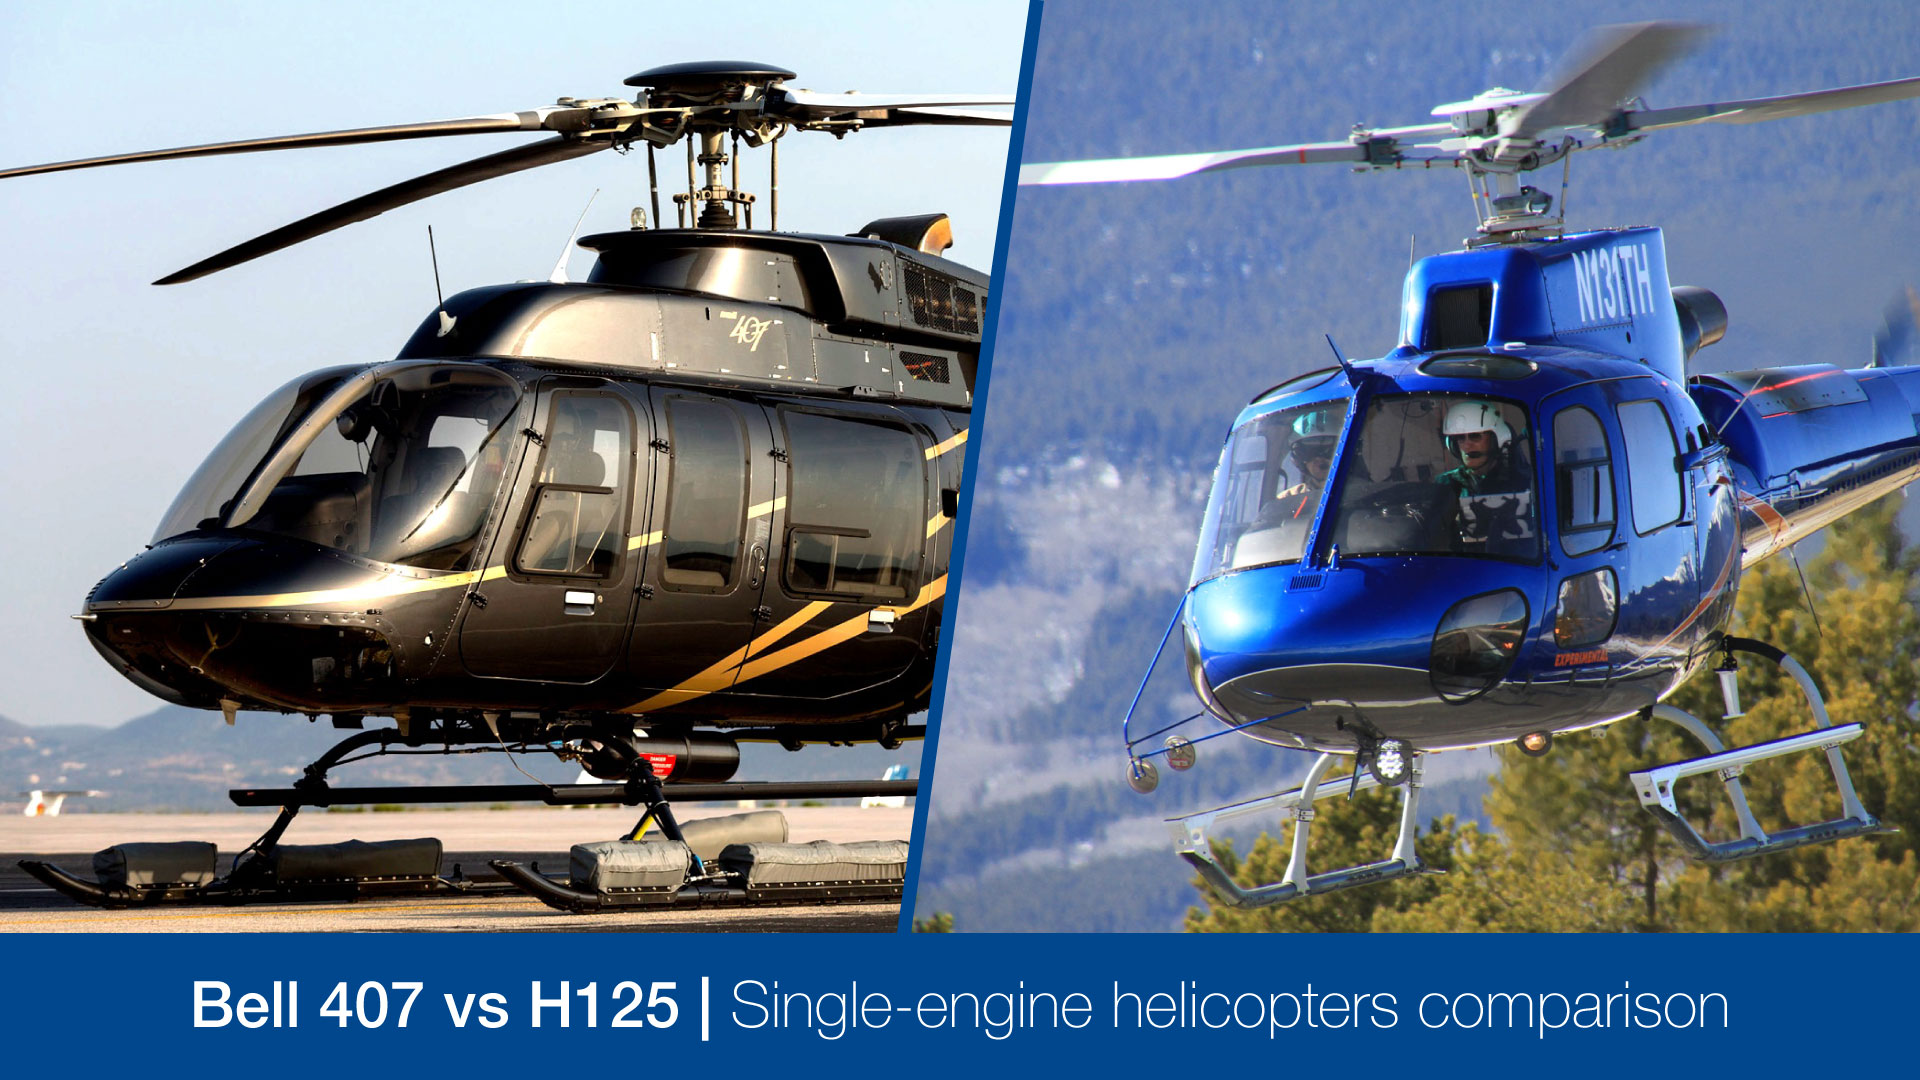 Bell 407 vs H125 | Single-engine helicopters comparison